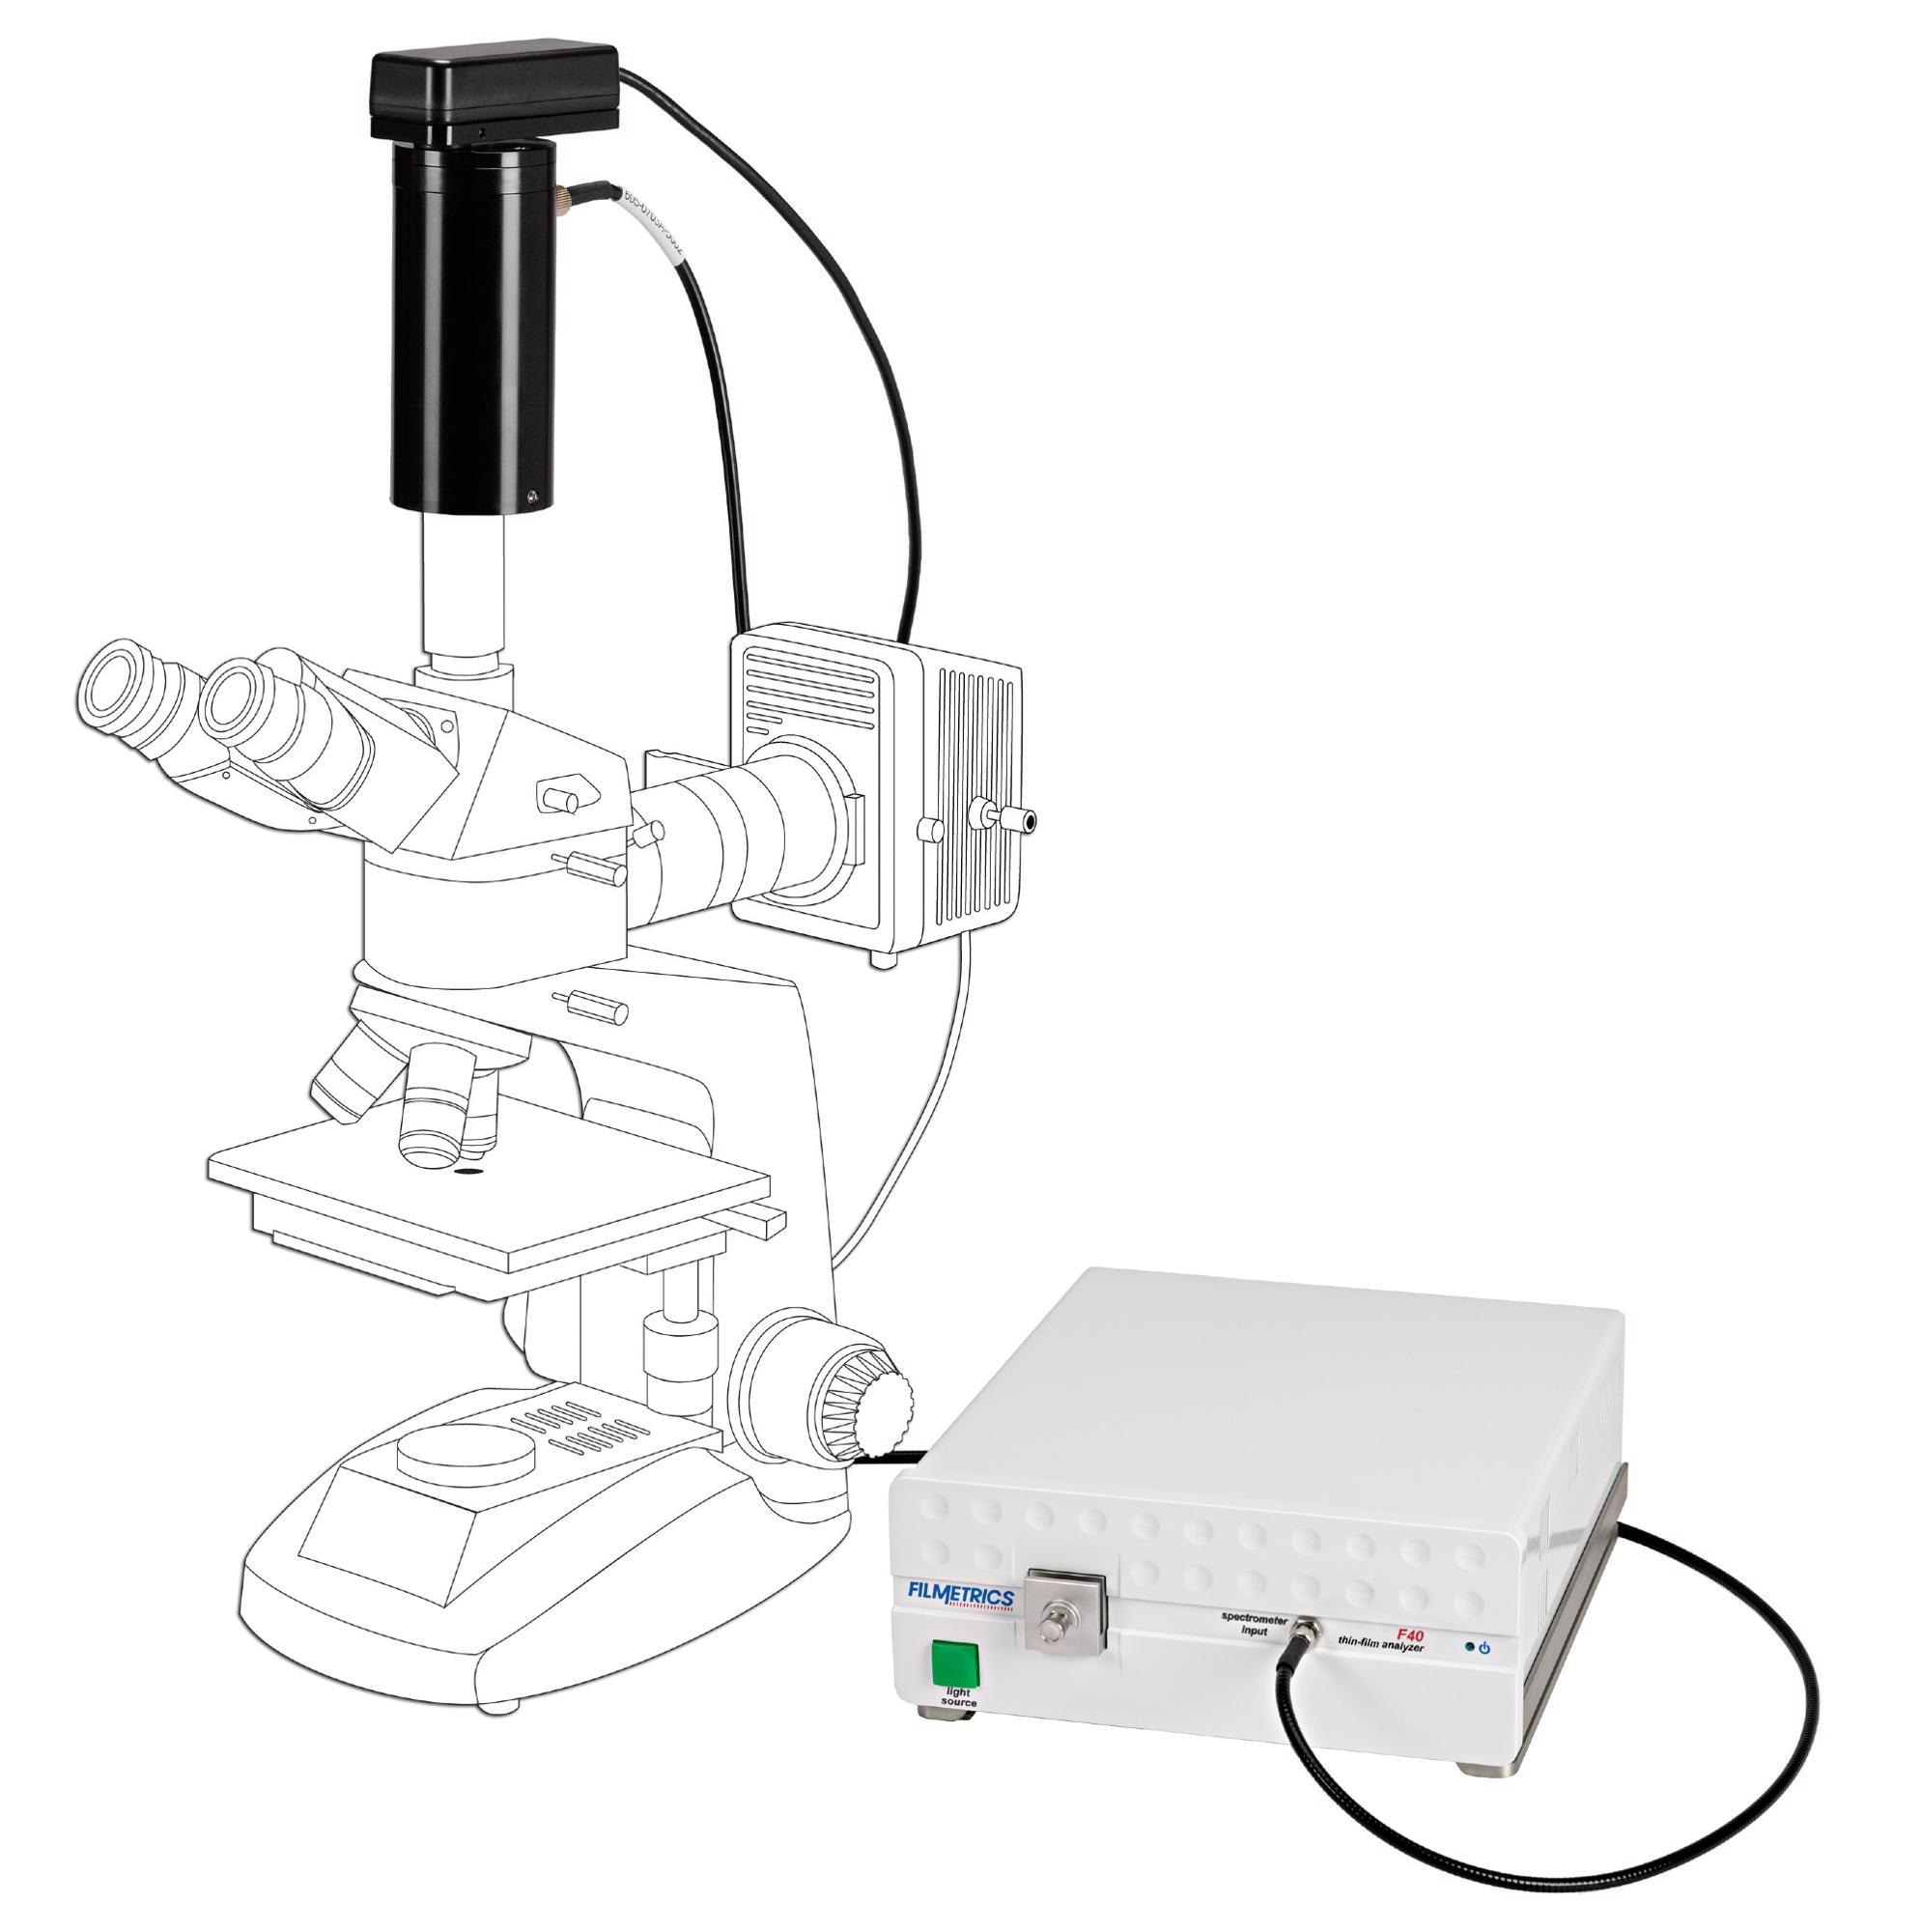 Filmetrics® F40: Measure Thickness and Refractive Index